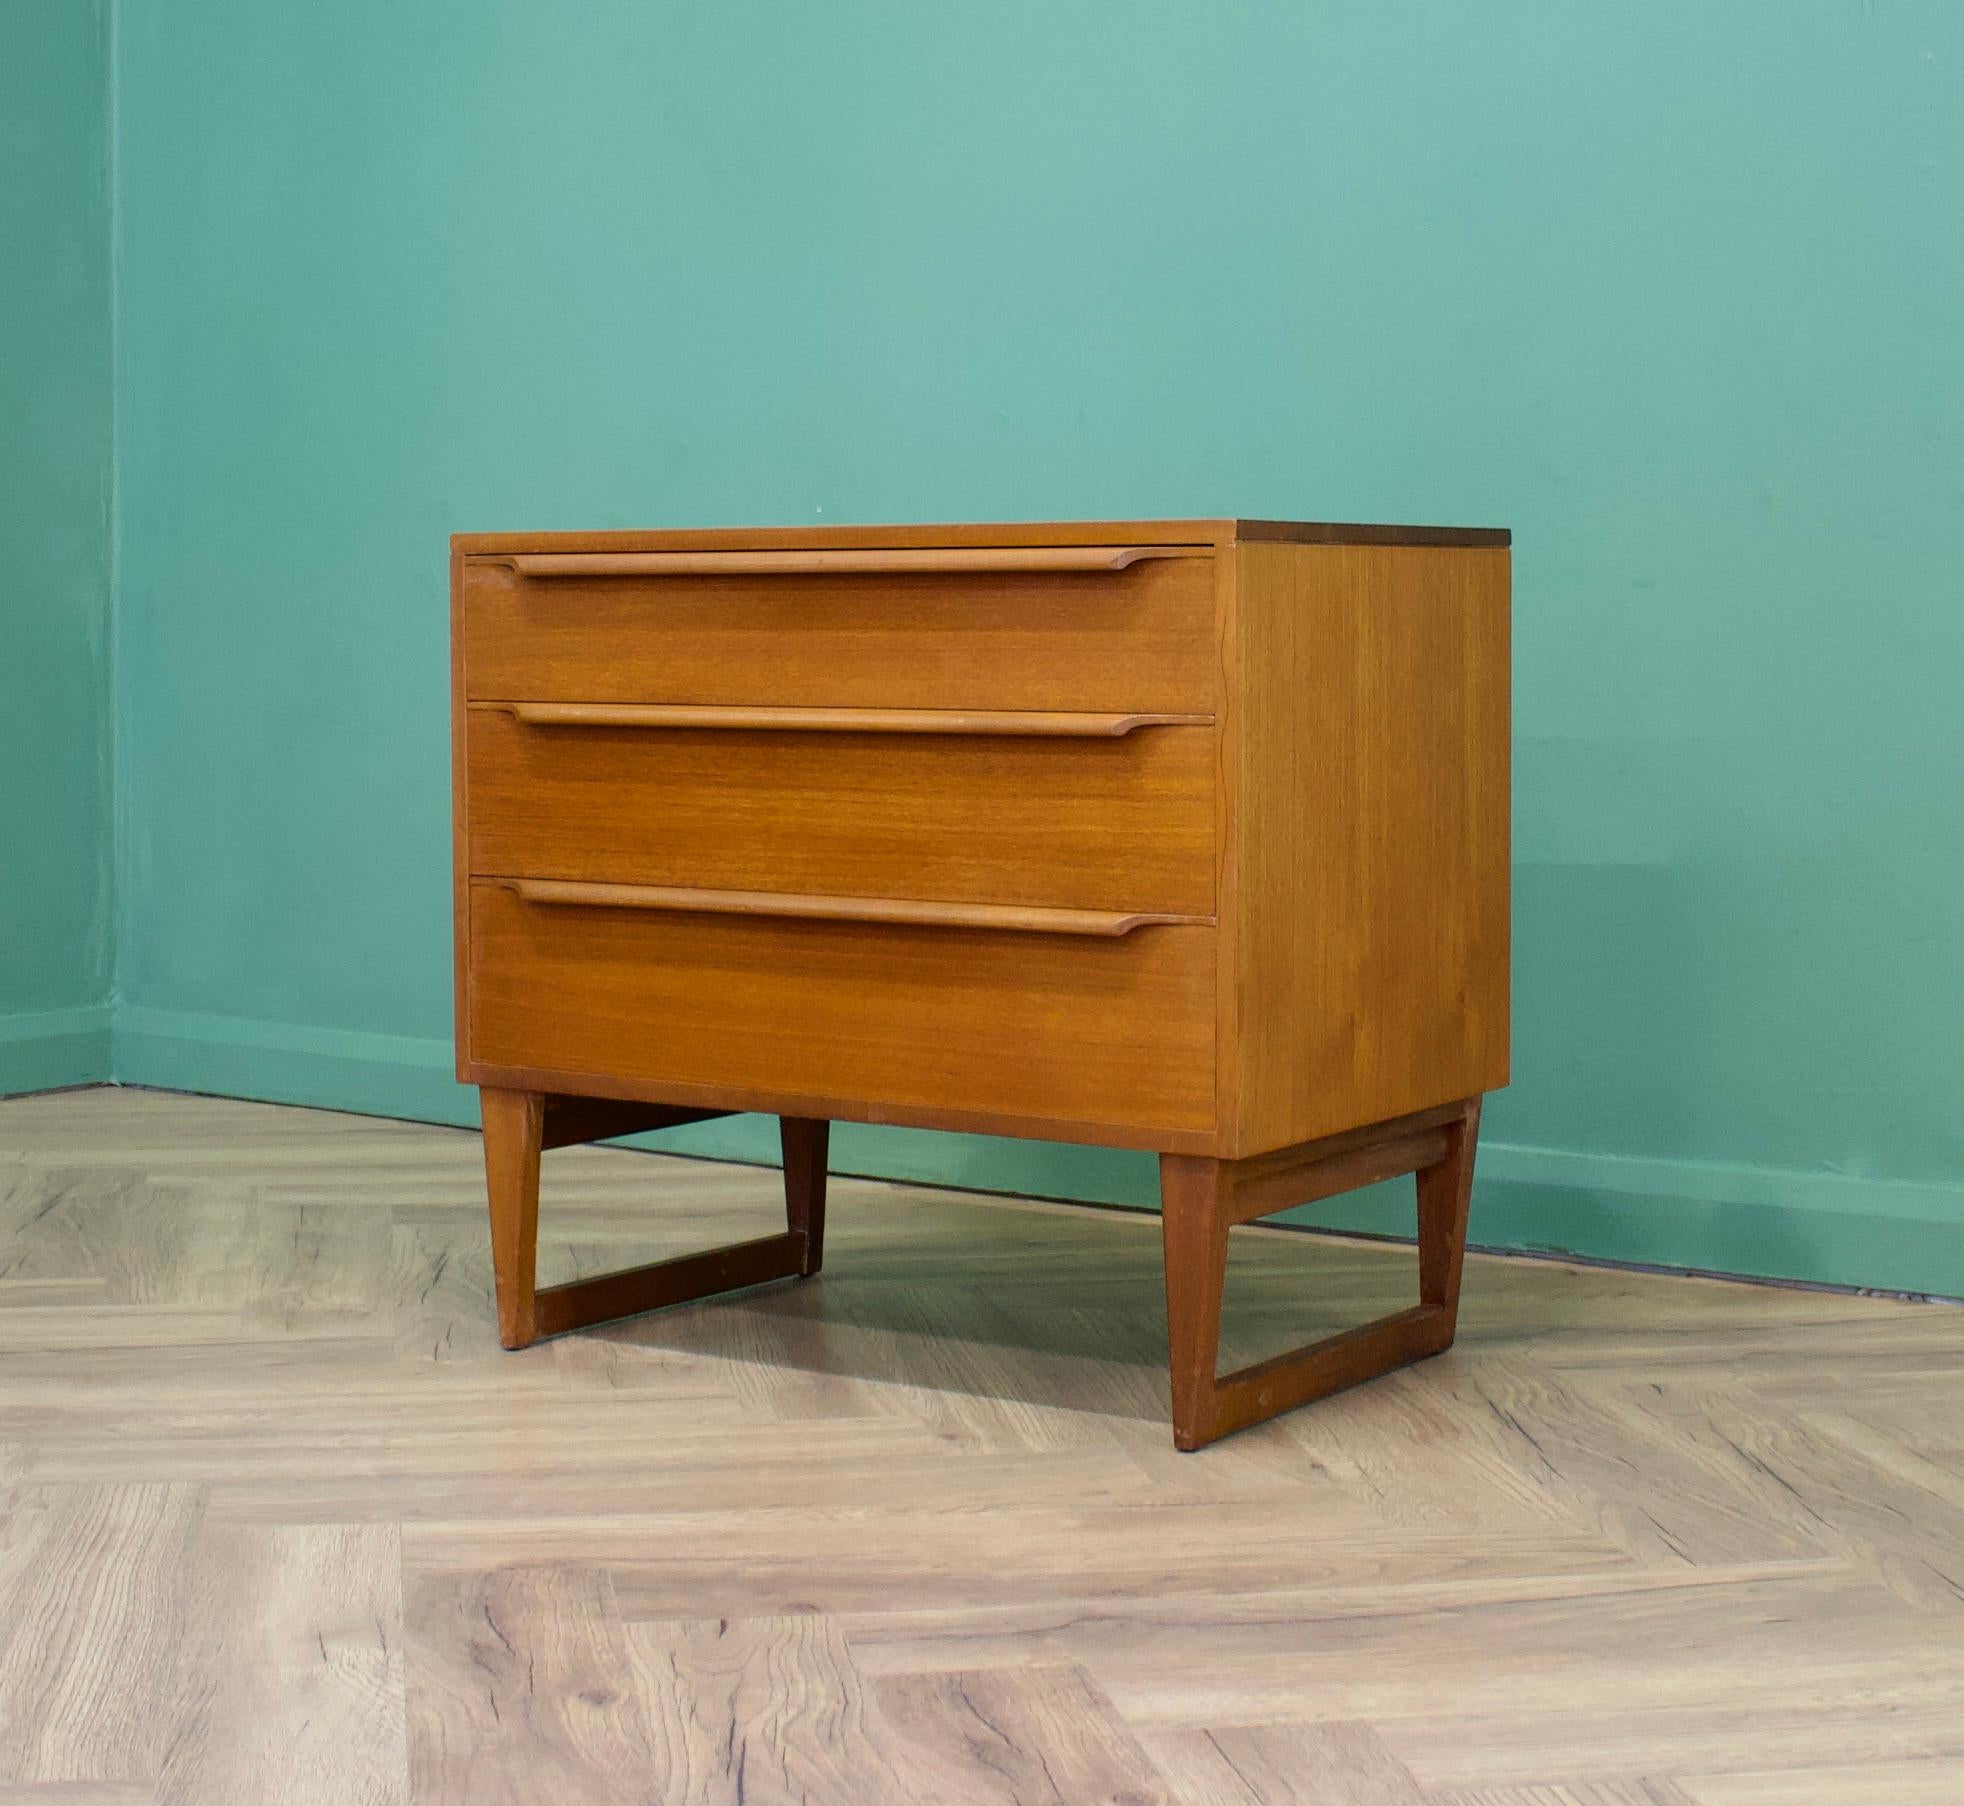 - Midcentury chest of drawers
- Manufactured in UK
- Made from teak and teak veneer.